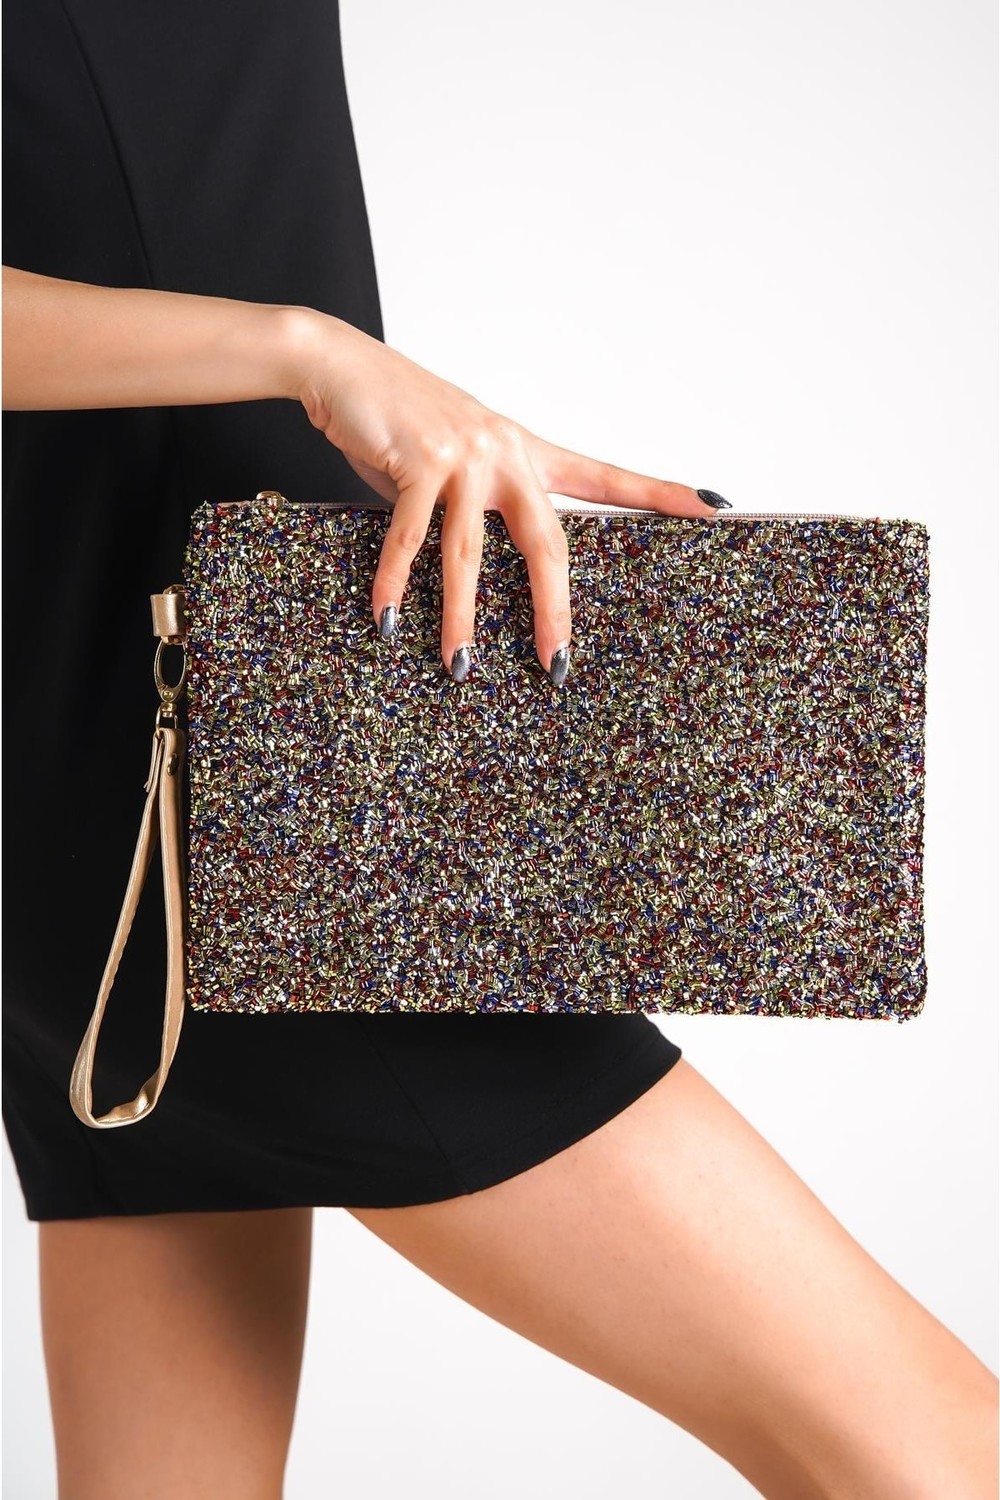 Capone Outfitters Clutch - Brown - Marled